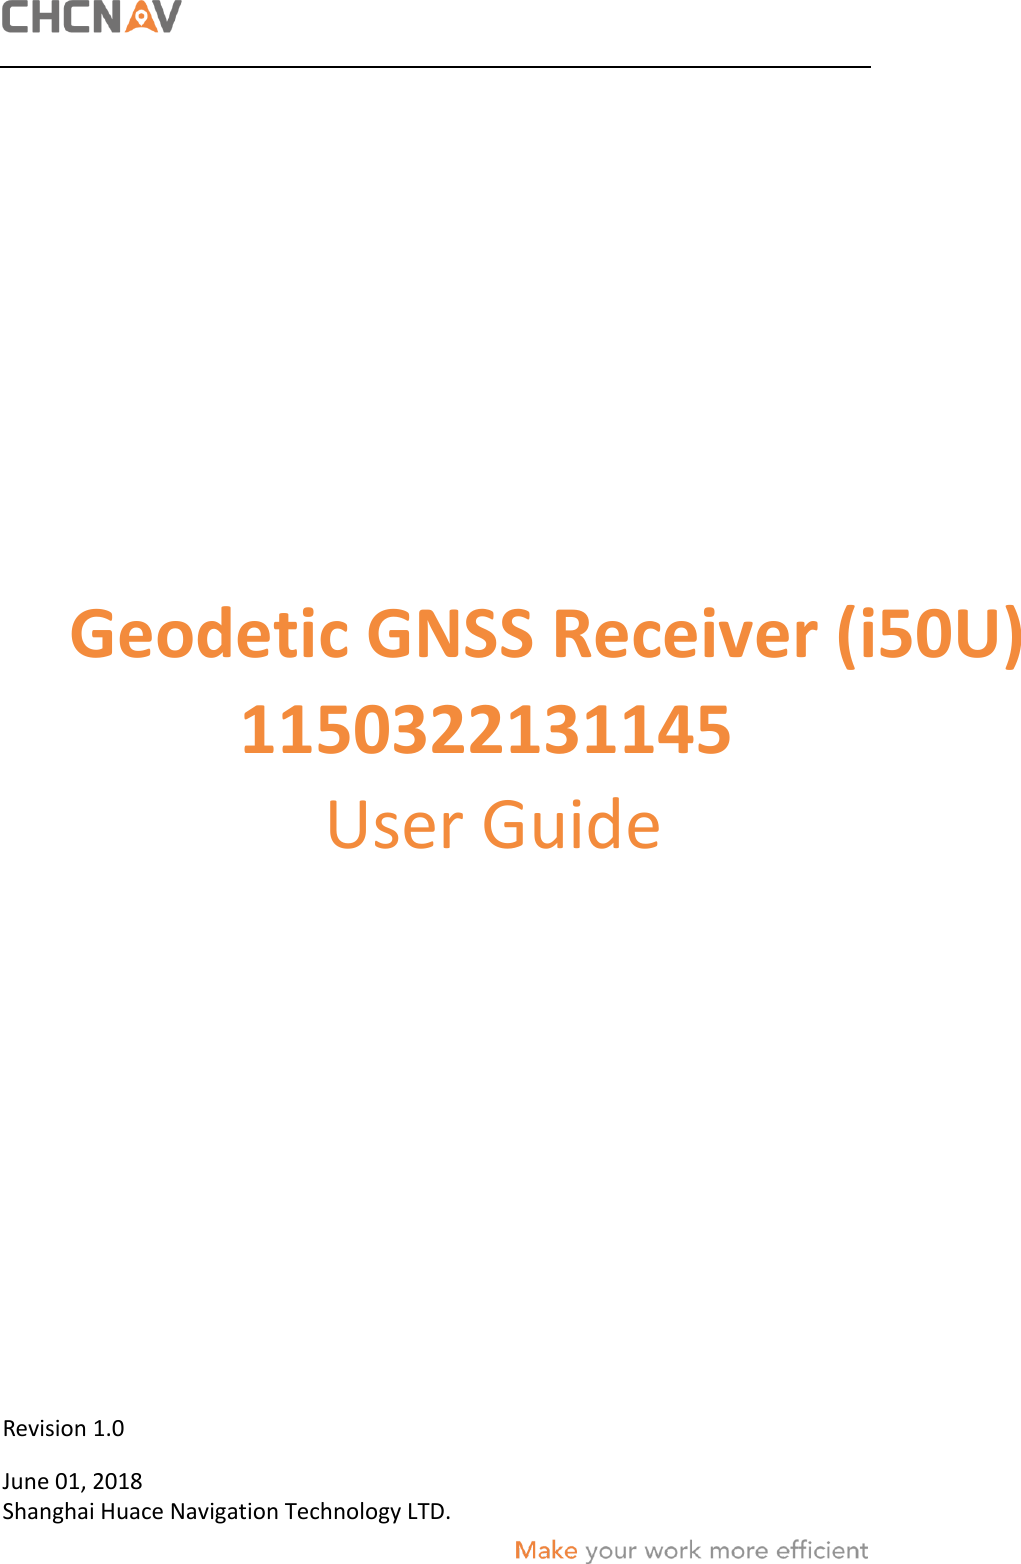 Page 1 of Huace Navigation Technology A01014 Geodetic GNSS Receiver i50U User Manual 